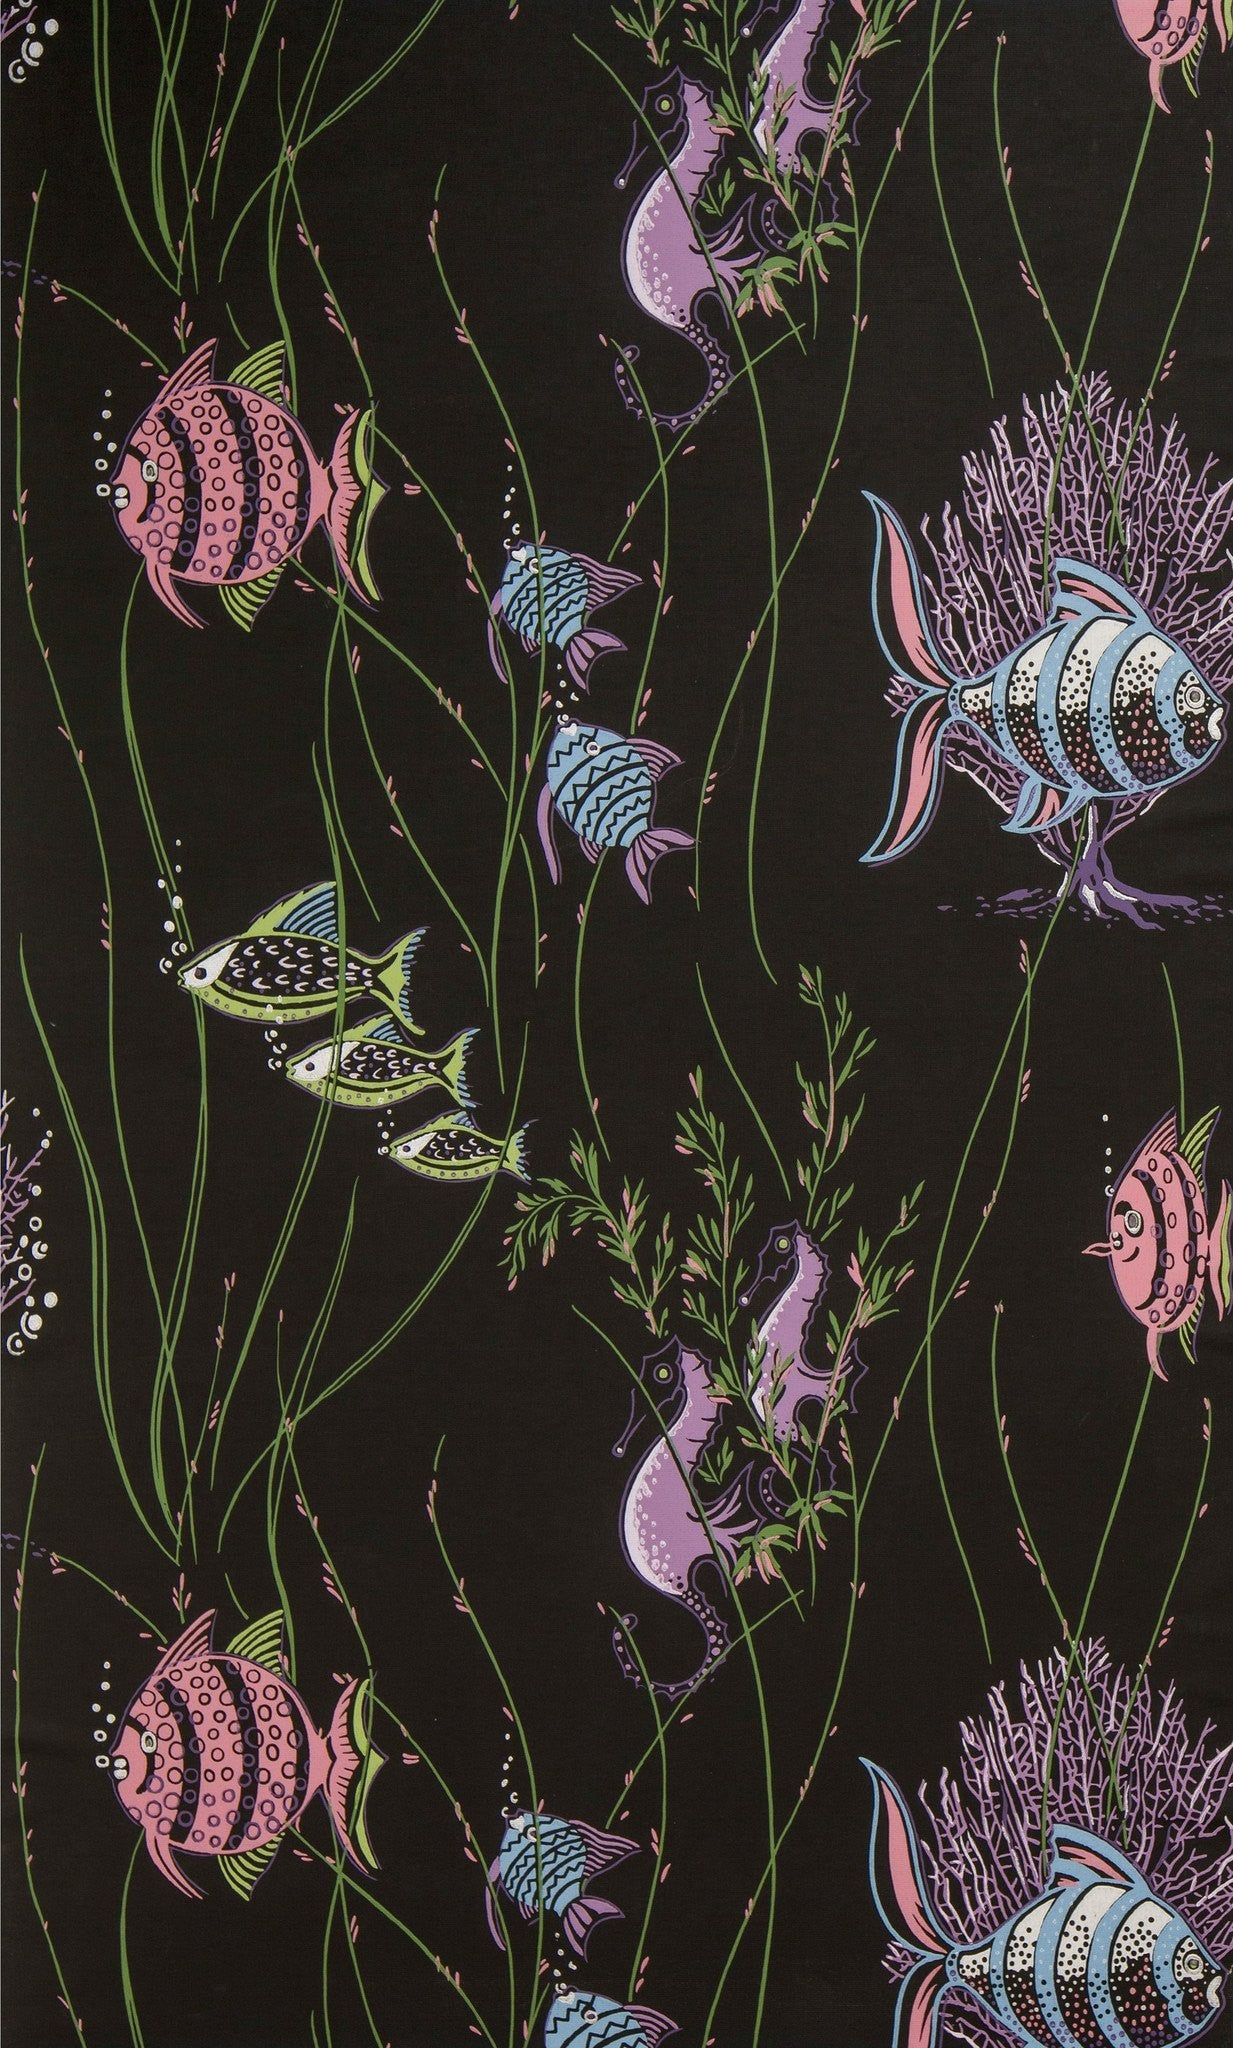 A fabric swatch with a black background and multicolored fish and seaweed print - Fish